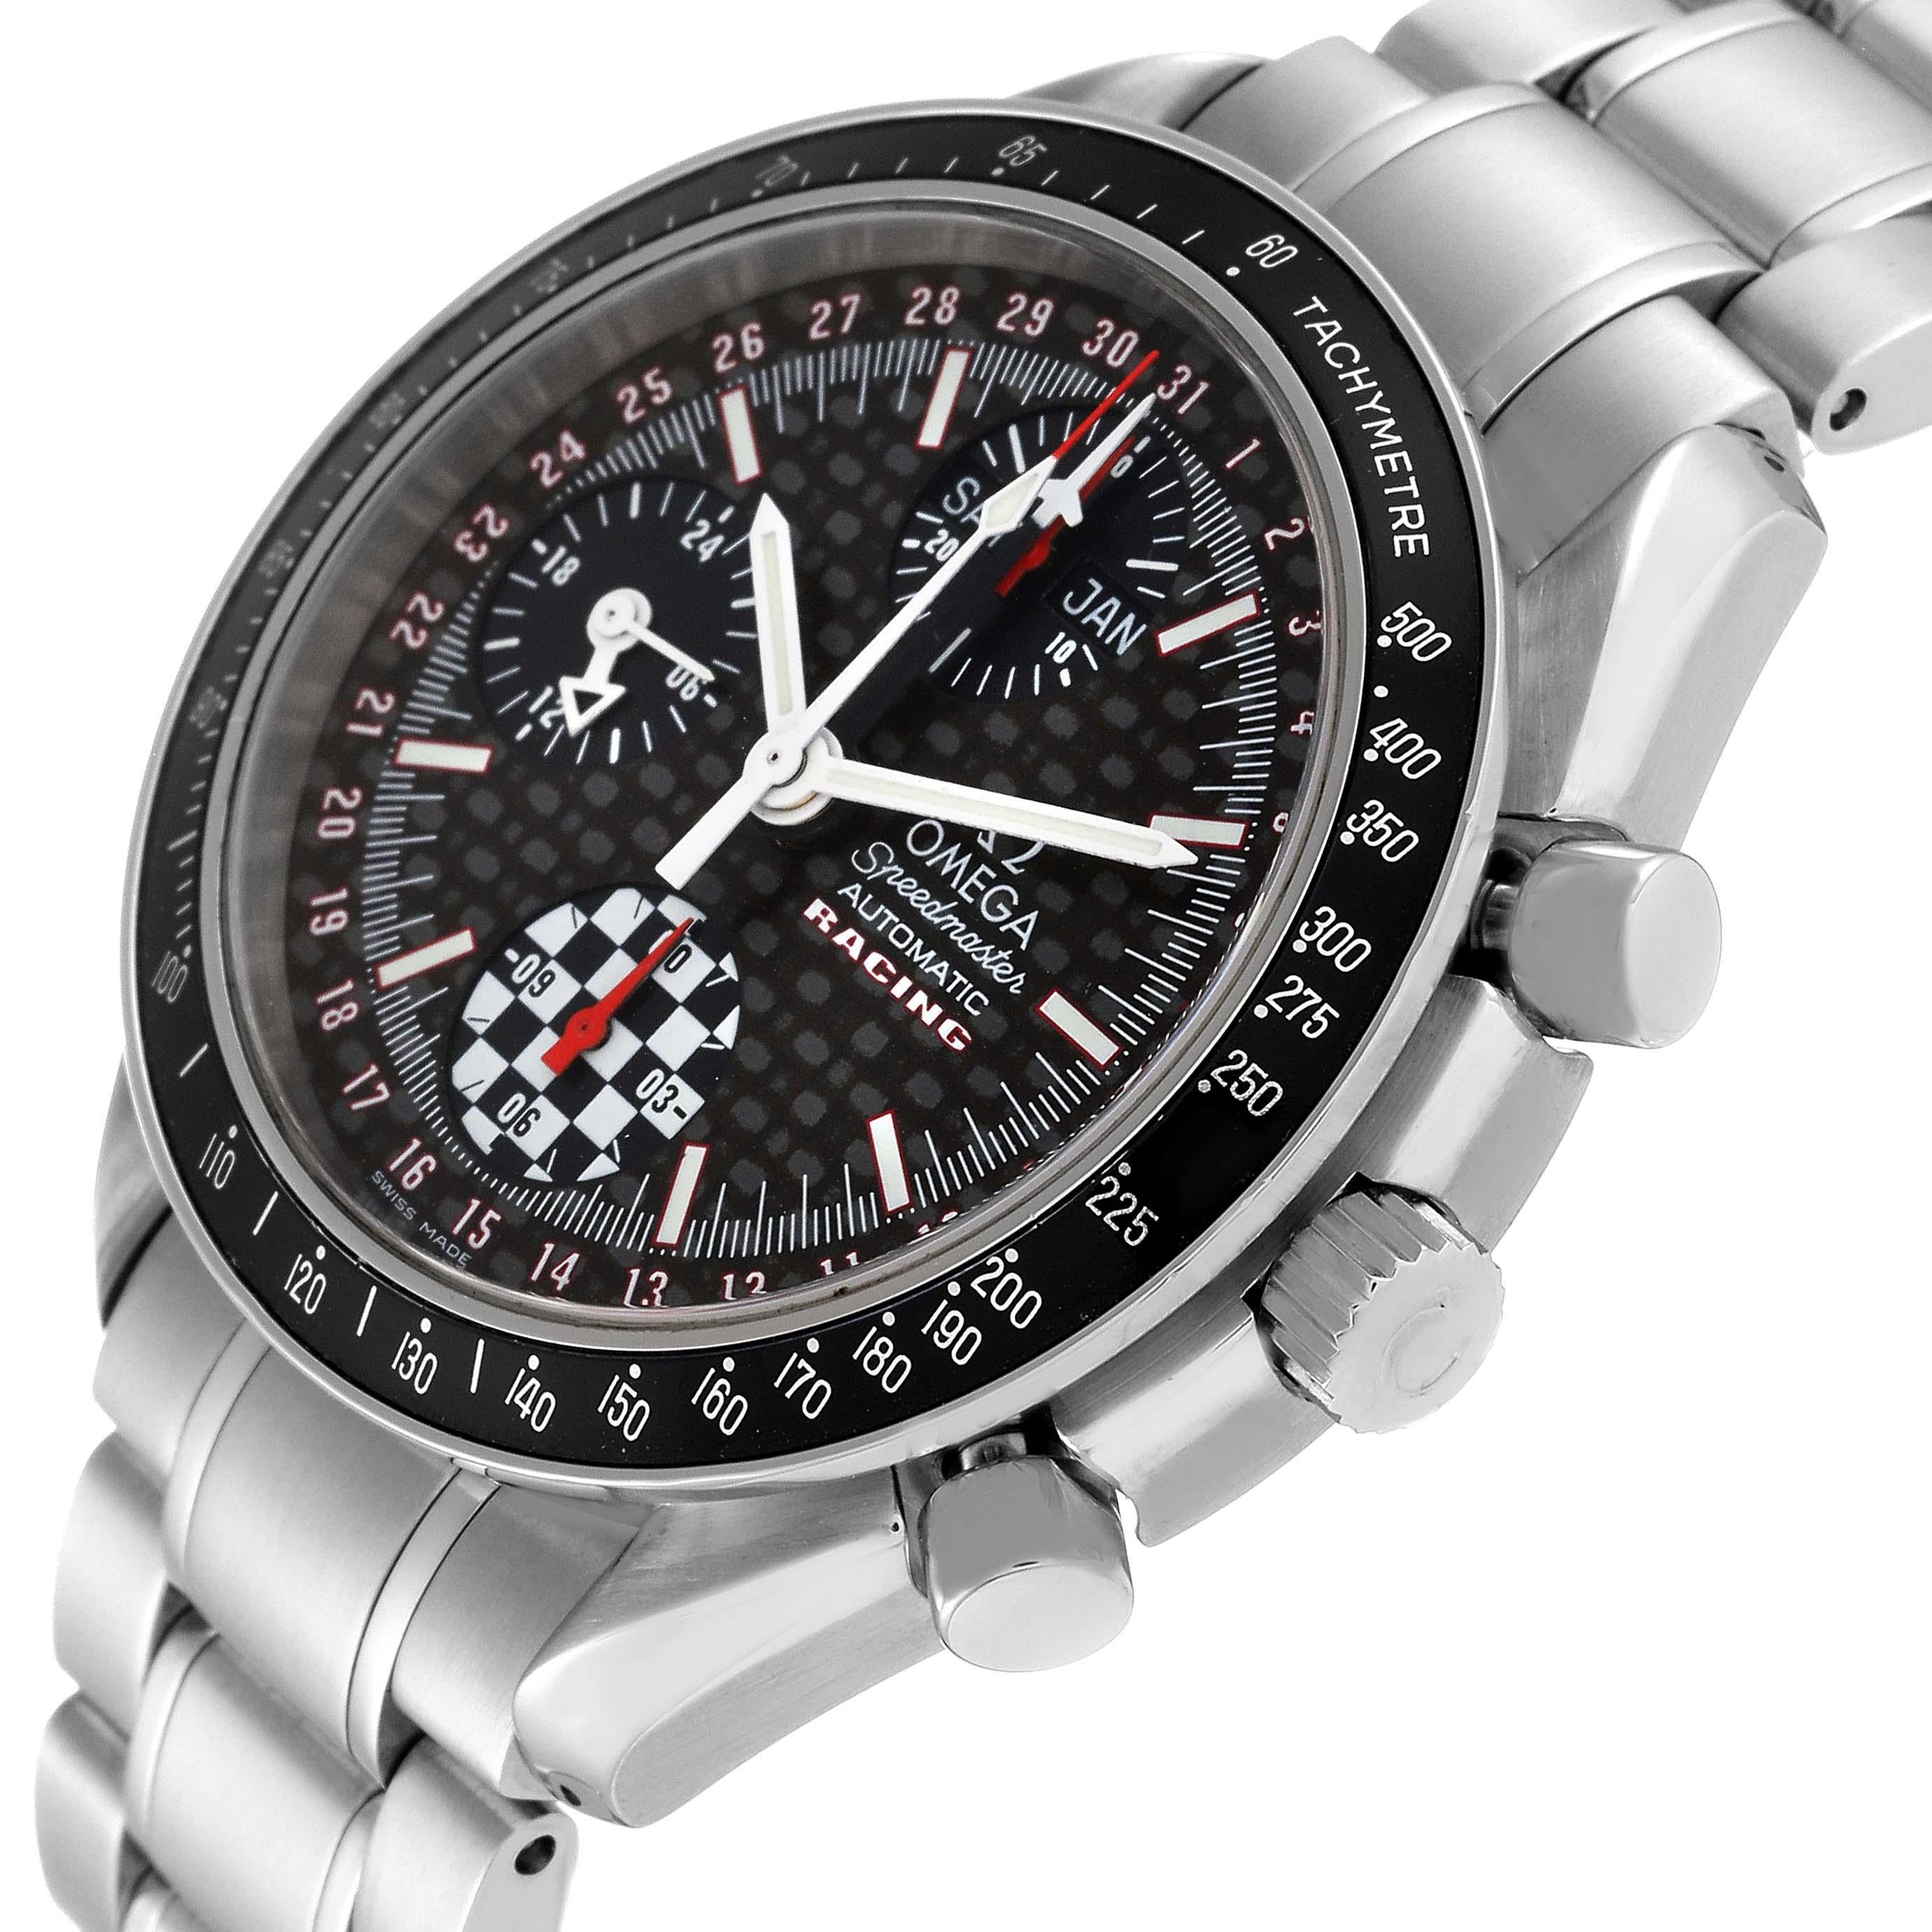 Omega Speedmaster Day Date Schumacher Limited Edition Steel Mens Watch 3529.50.00 Box Card. Automatic self-winding chronograph movement. Stainless steel round case 39.0 mm in diameter. Caseback engraved with Michael Schumacher's signature and